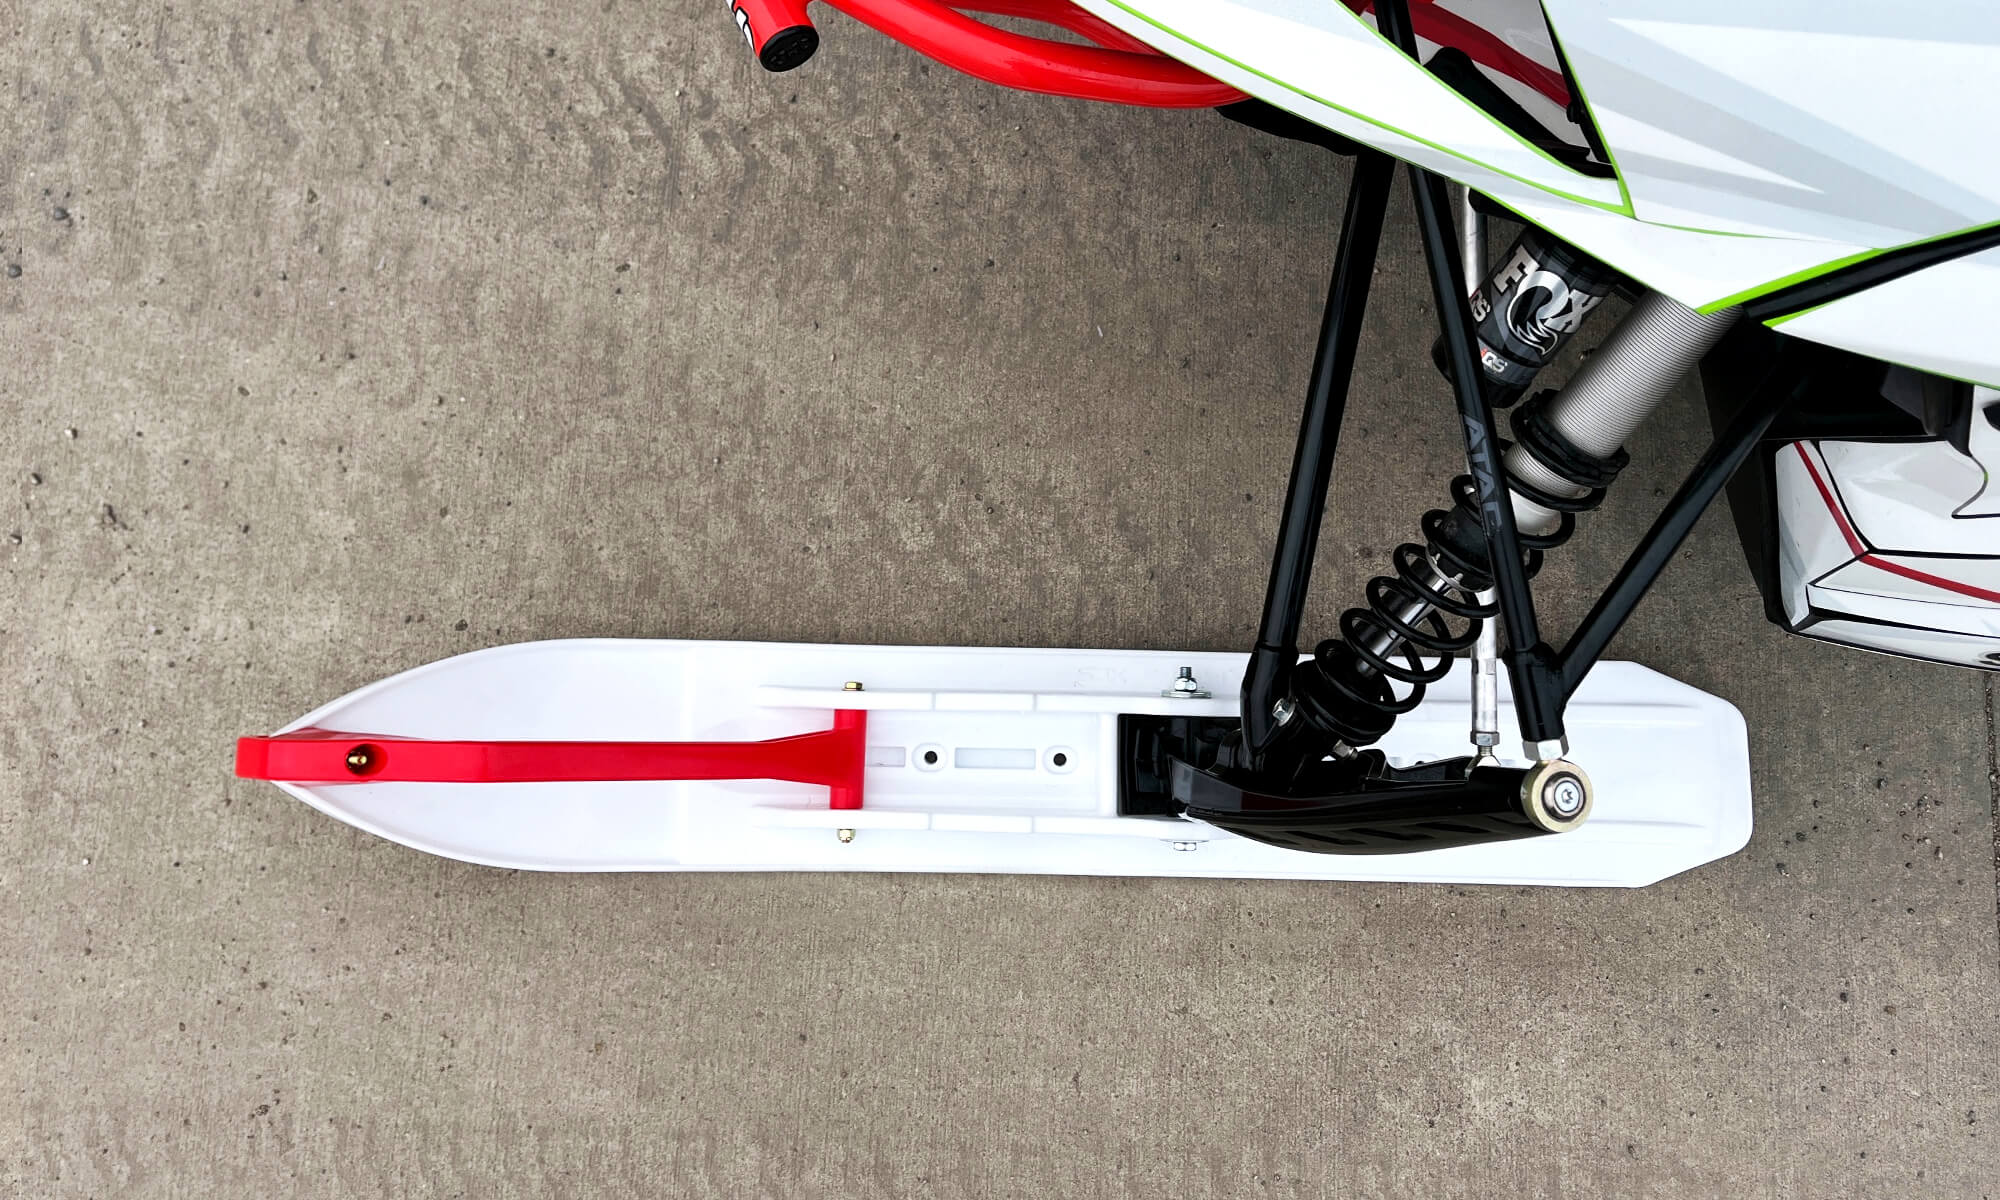 White C&A Pro XCS ski with red handle installed on Arctic Cat snowmobile